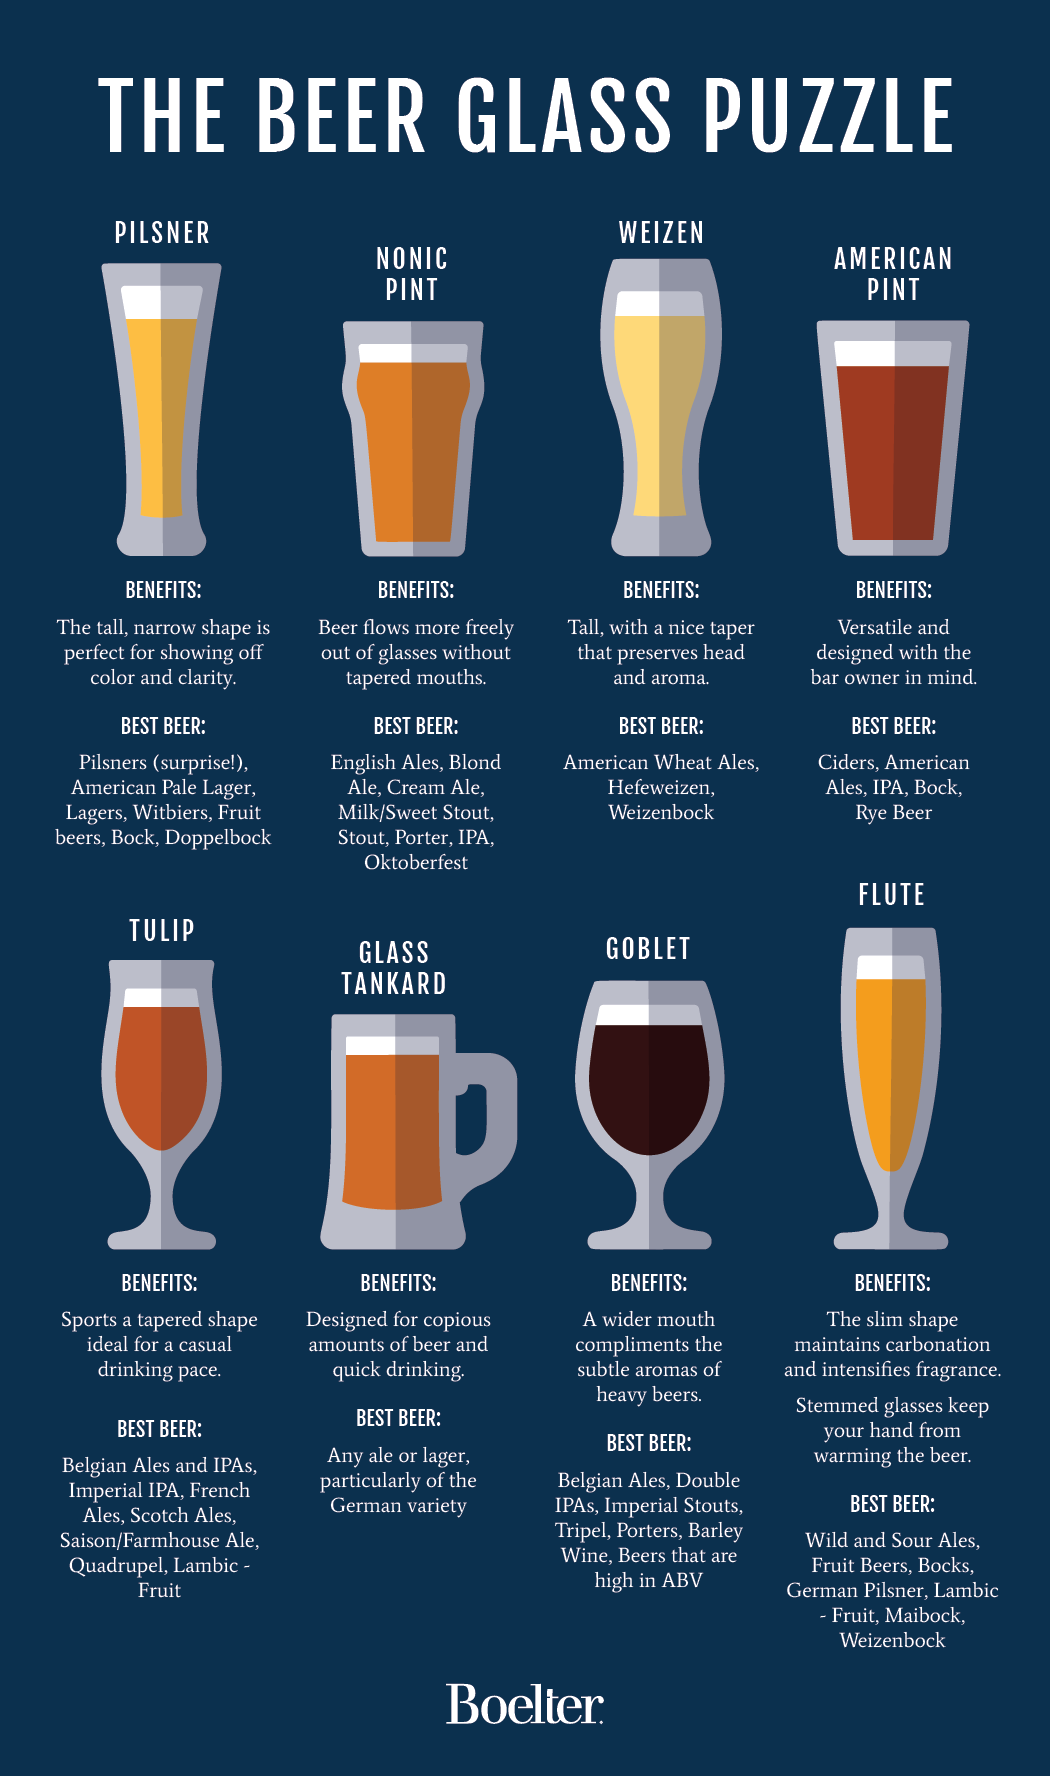 https://2347568.fs1.hubspotusercontent-na1.net/hubfs/2347568/Beer%20Style%20Guide%20Infographic%20-%20Boelter.png